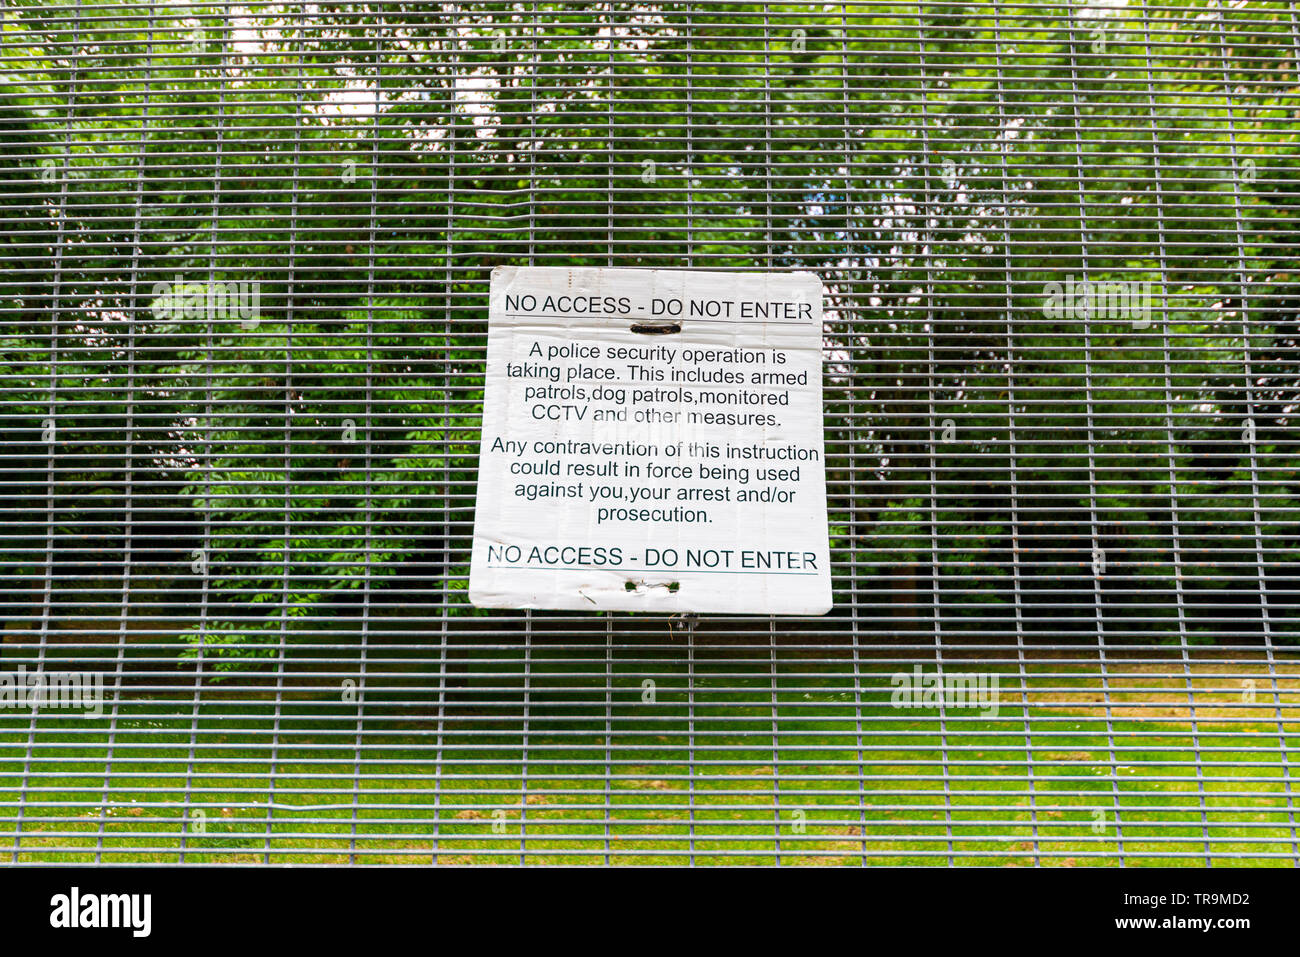 Security around Winfield House, Regent's Park, London, UK for the State Visit of US President Donald Trump. Temporary steel fence with warning sign Stock Photo